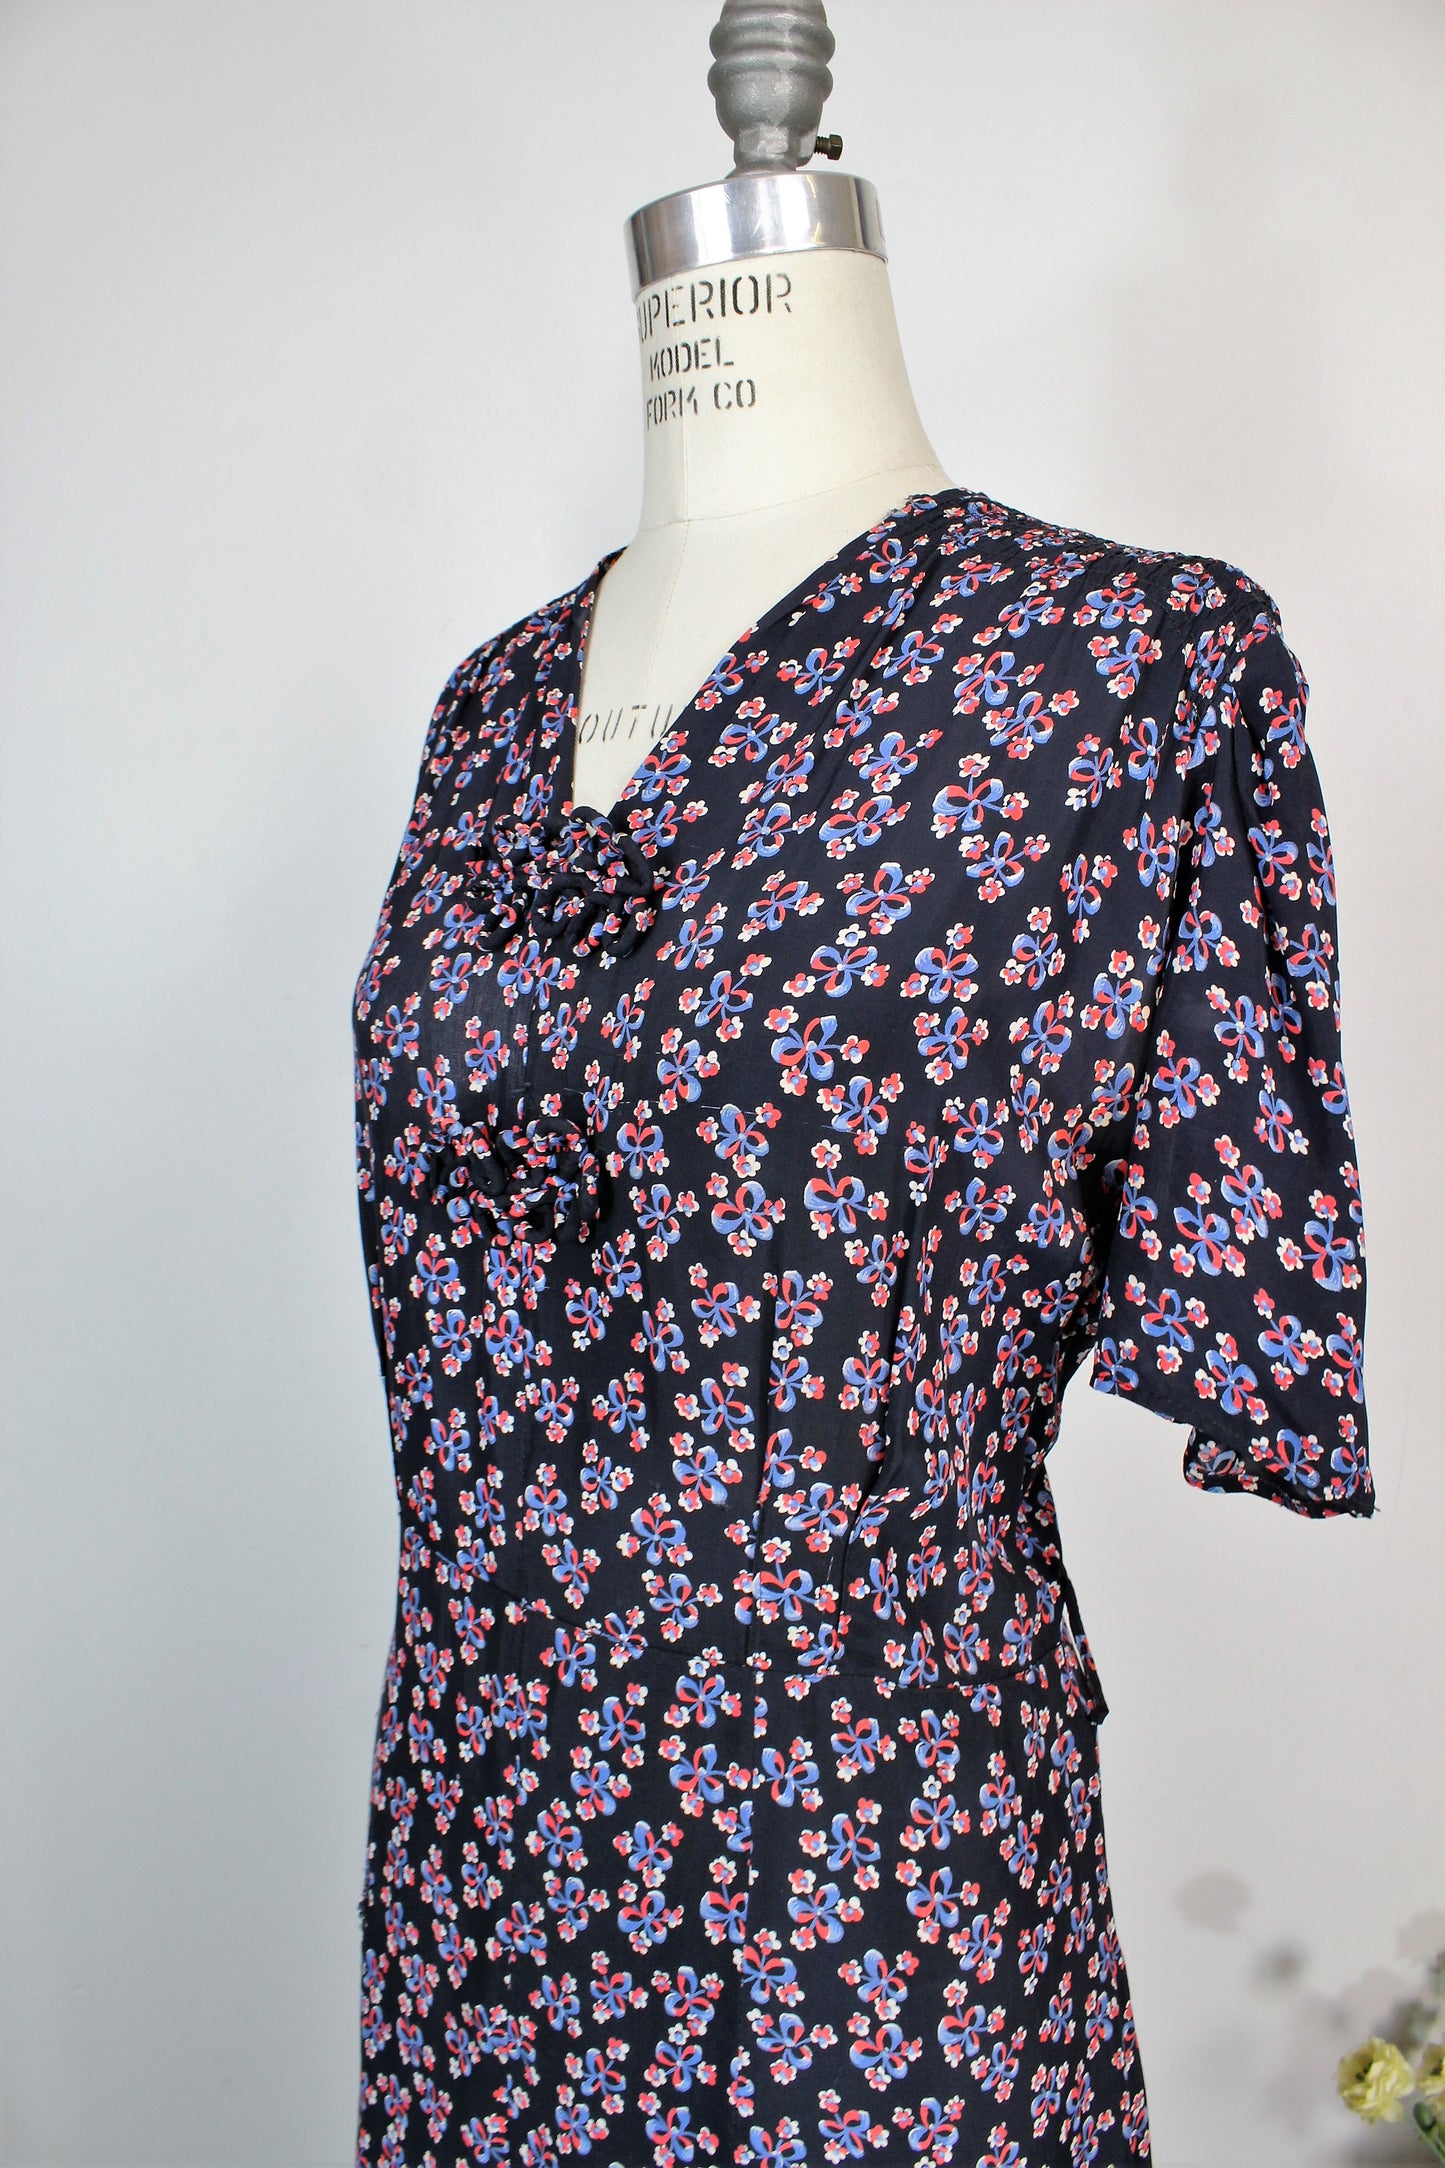 Vintage 1940s Rayon Day Dress With A Floral And Bow Print In Red White And Blue